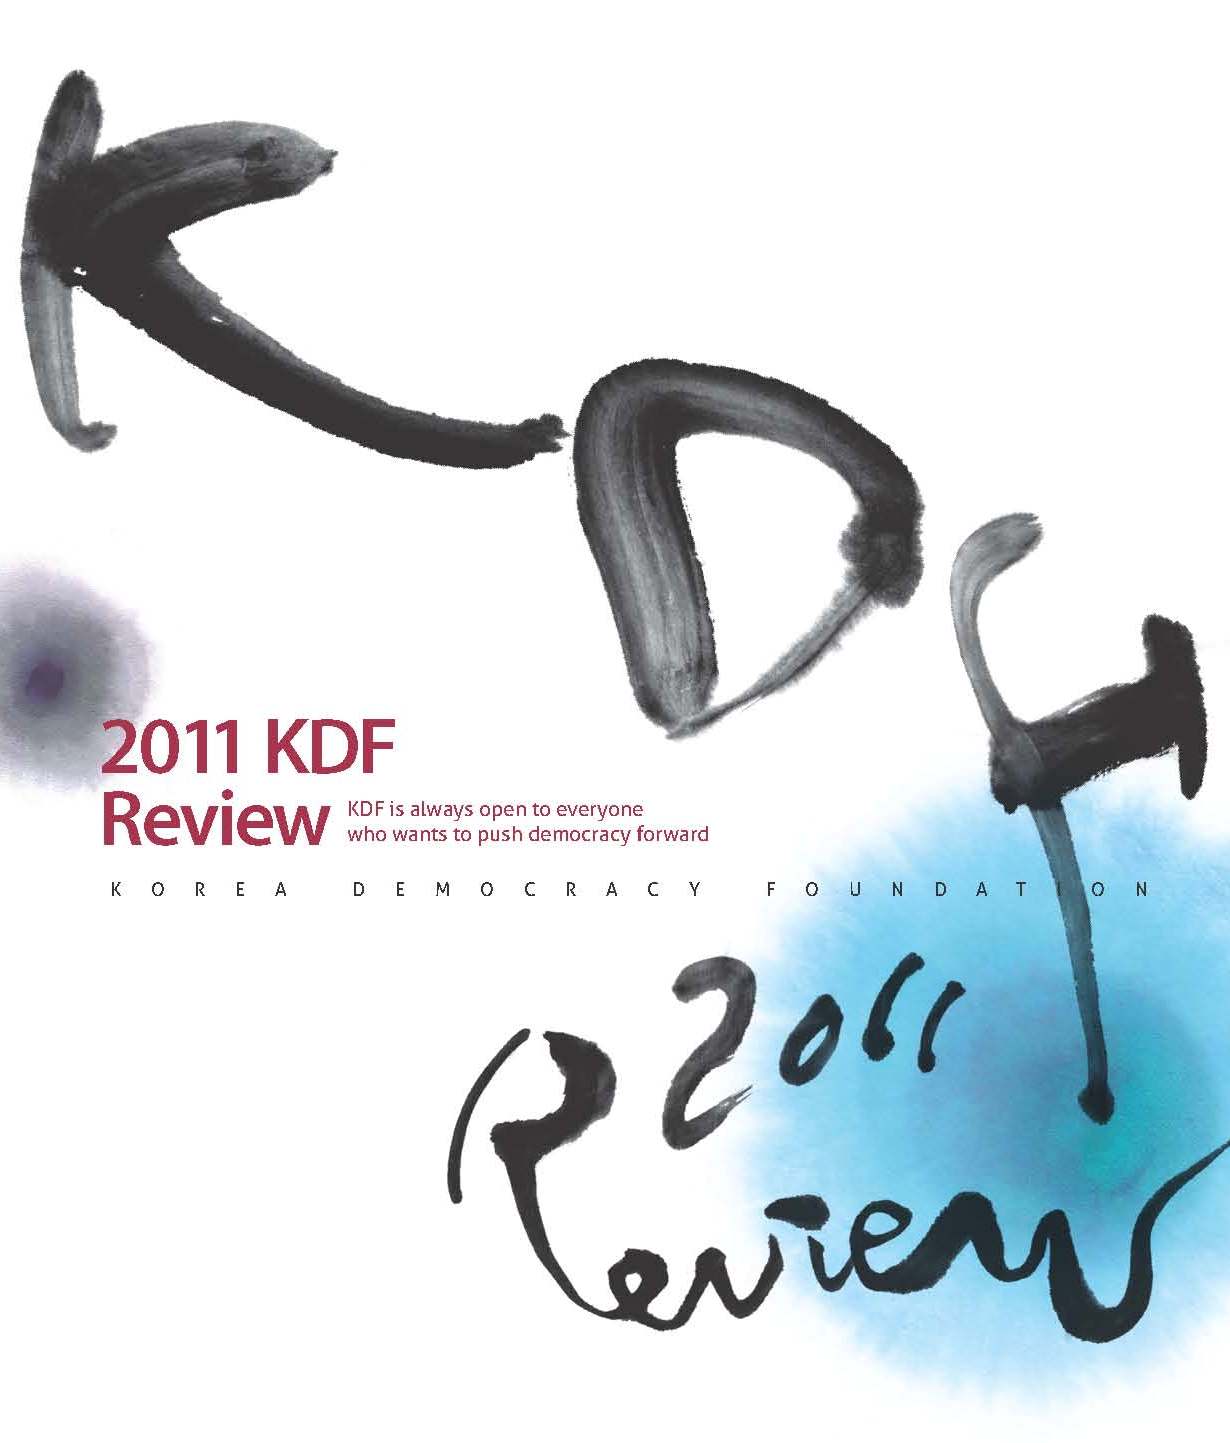 2011 KDF Review